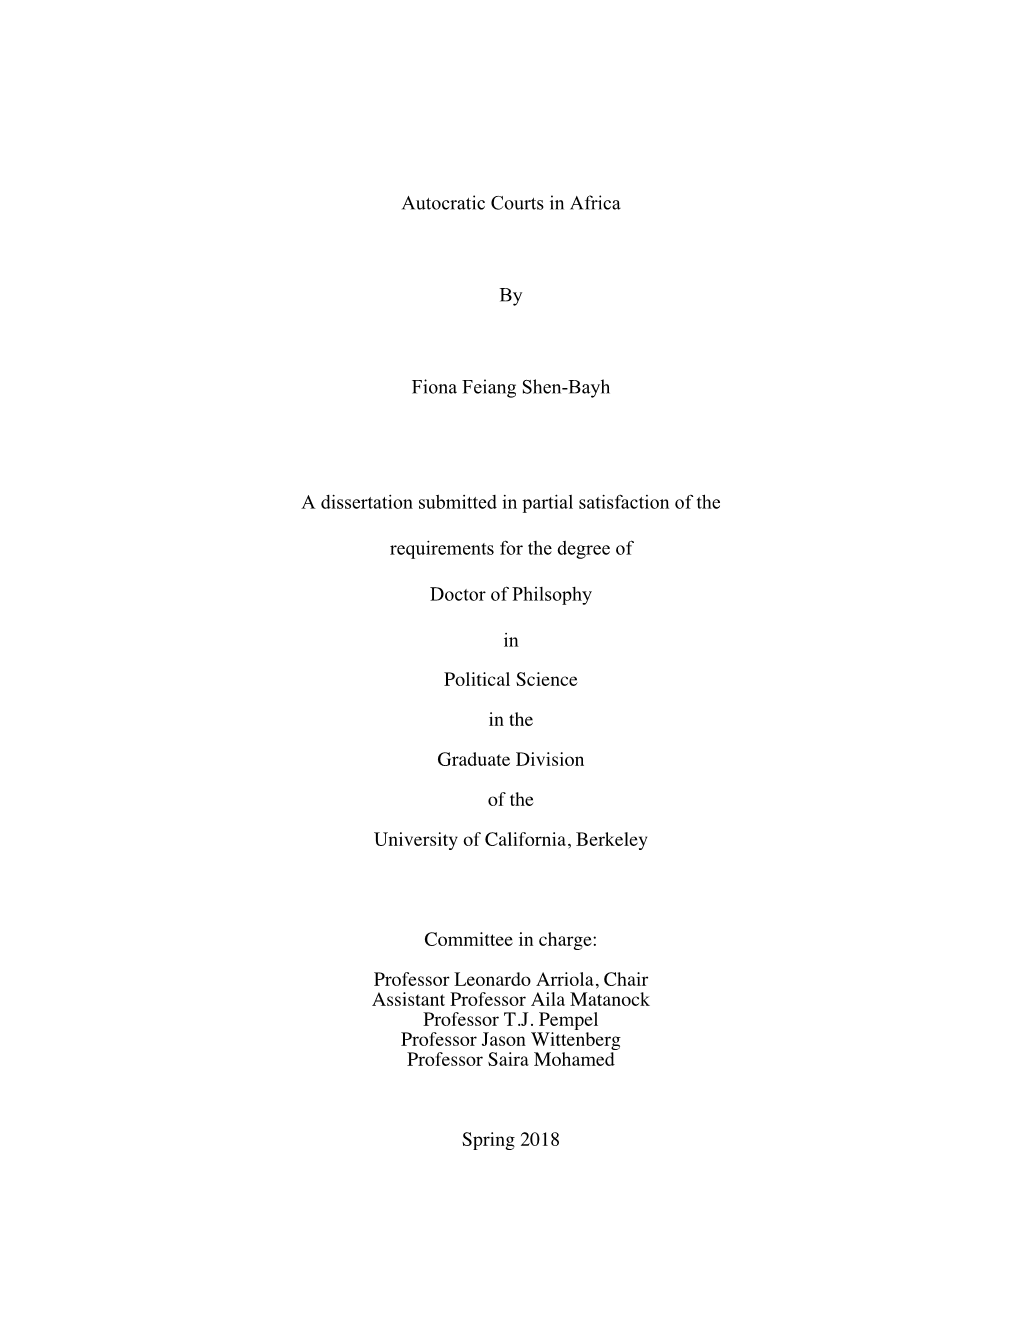 Autocratic Courts in Africa by Fiona Feiang Shen-Bayh a Dissertation